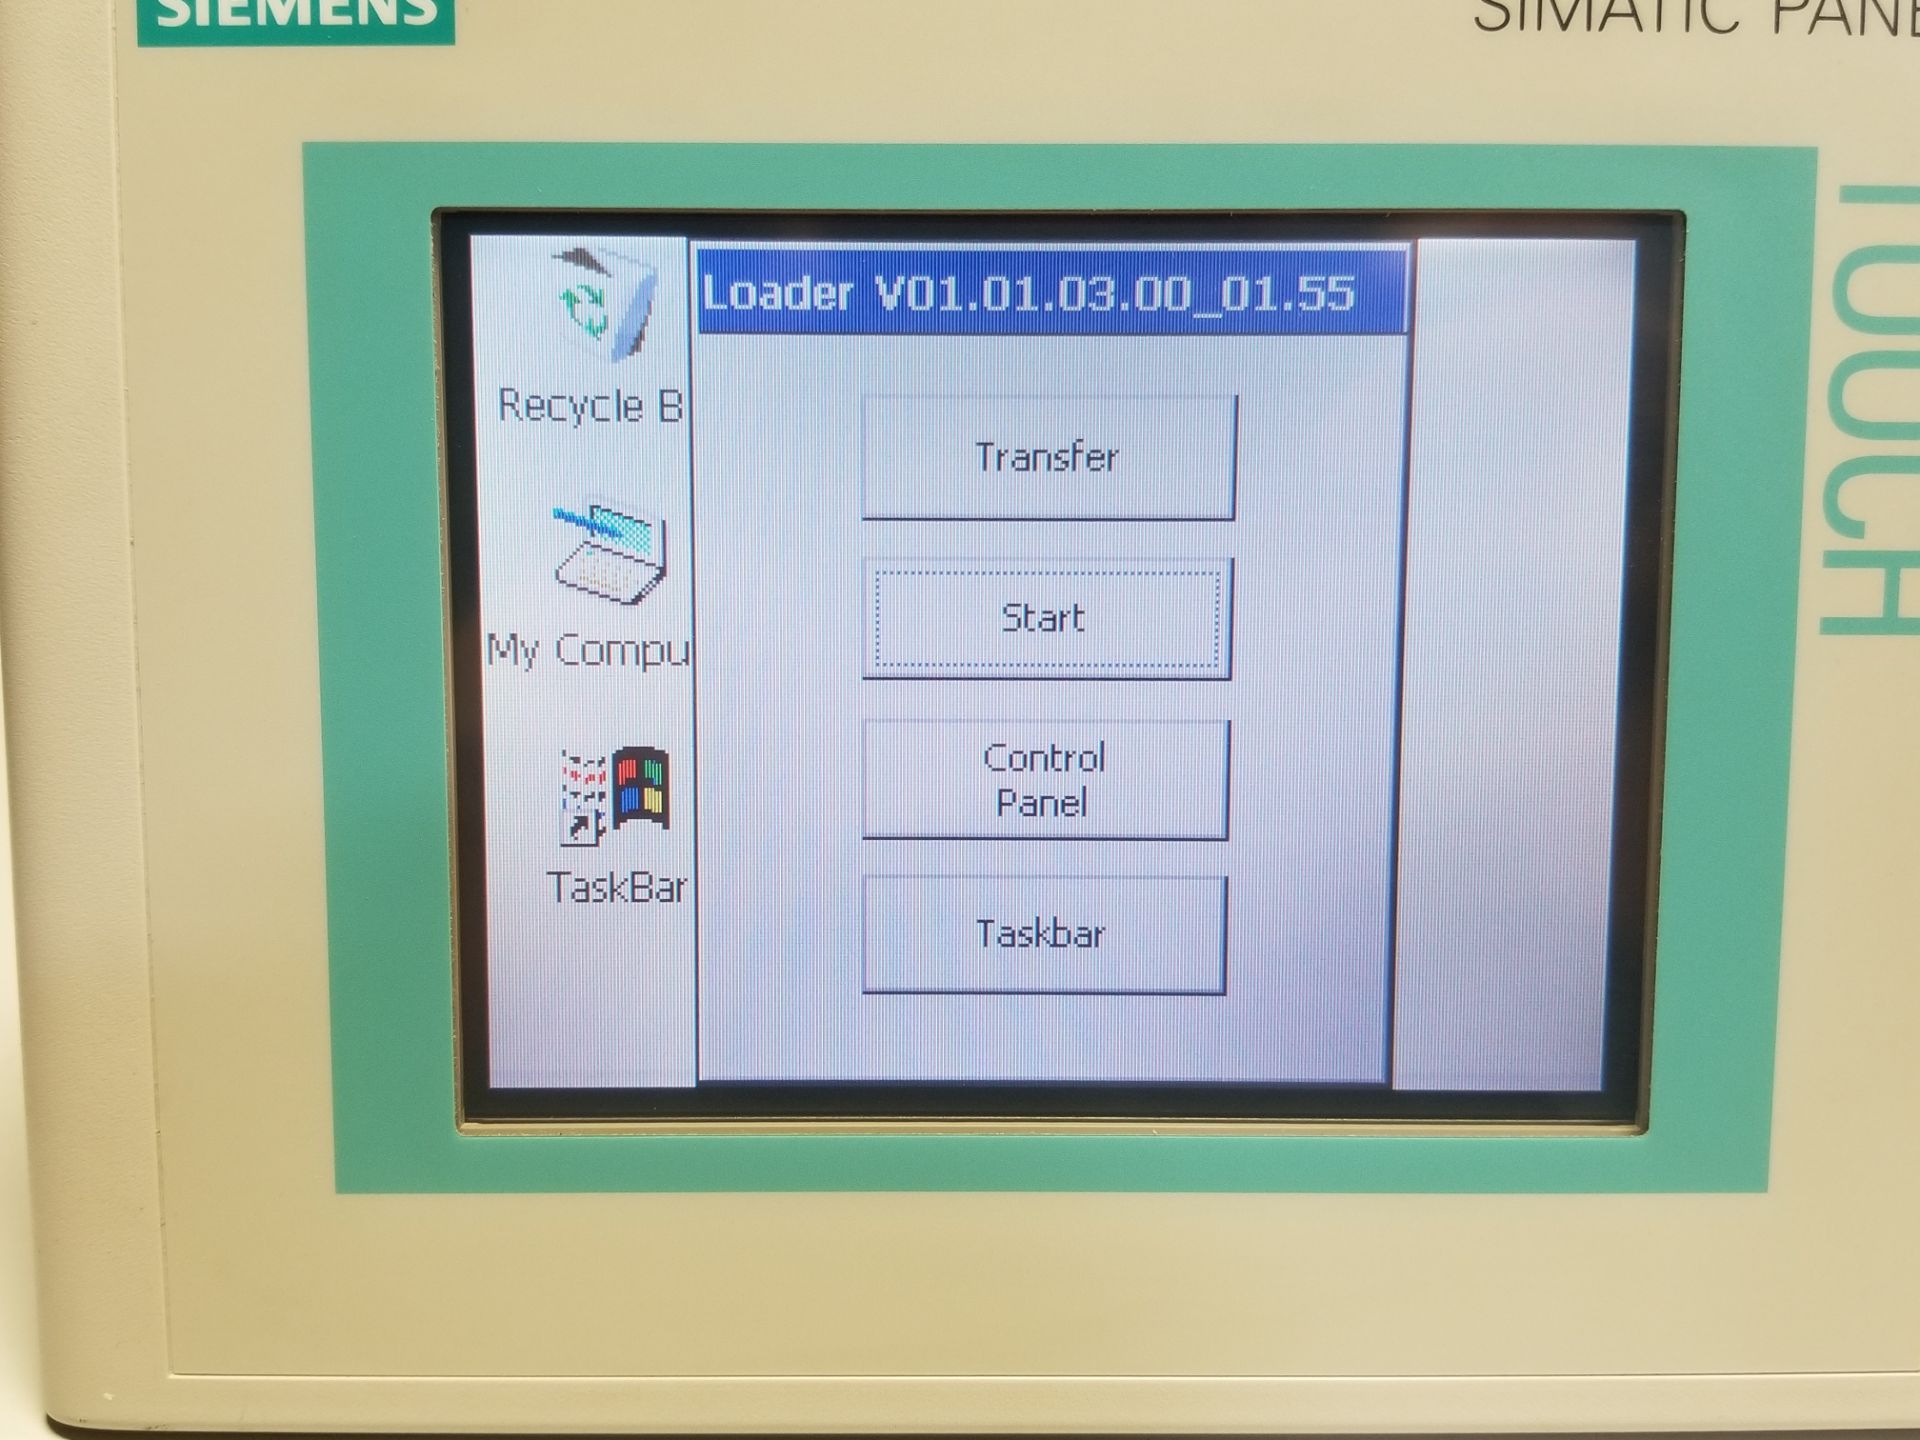 Siemens Simatic HMI Operator Interface Touch Panel PLC - Image 11 of 12